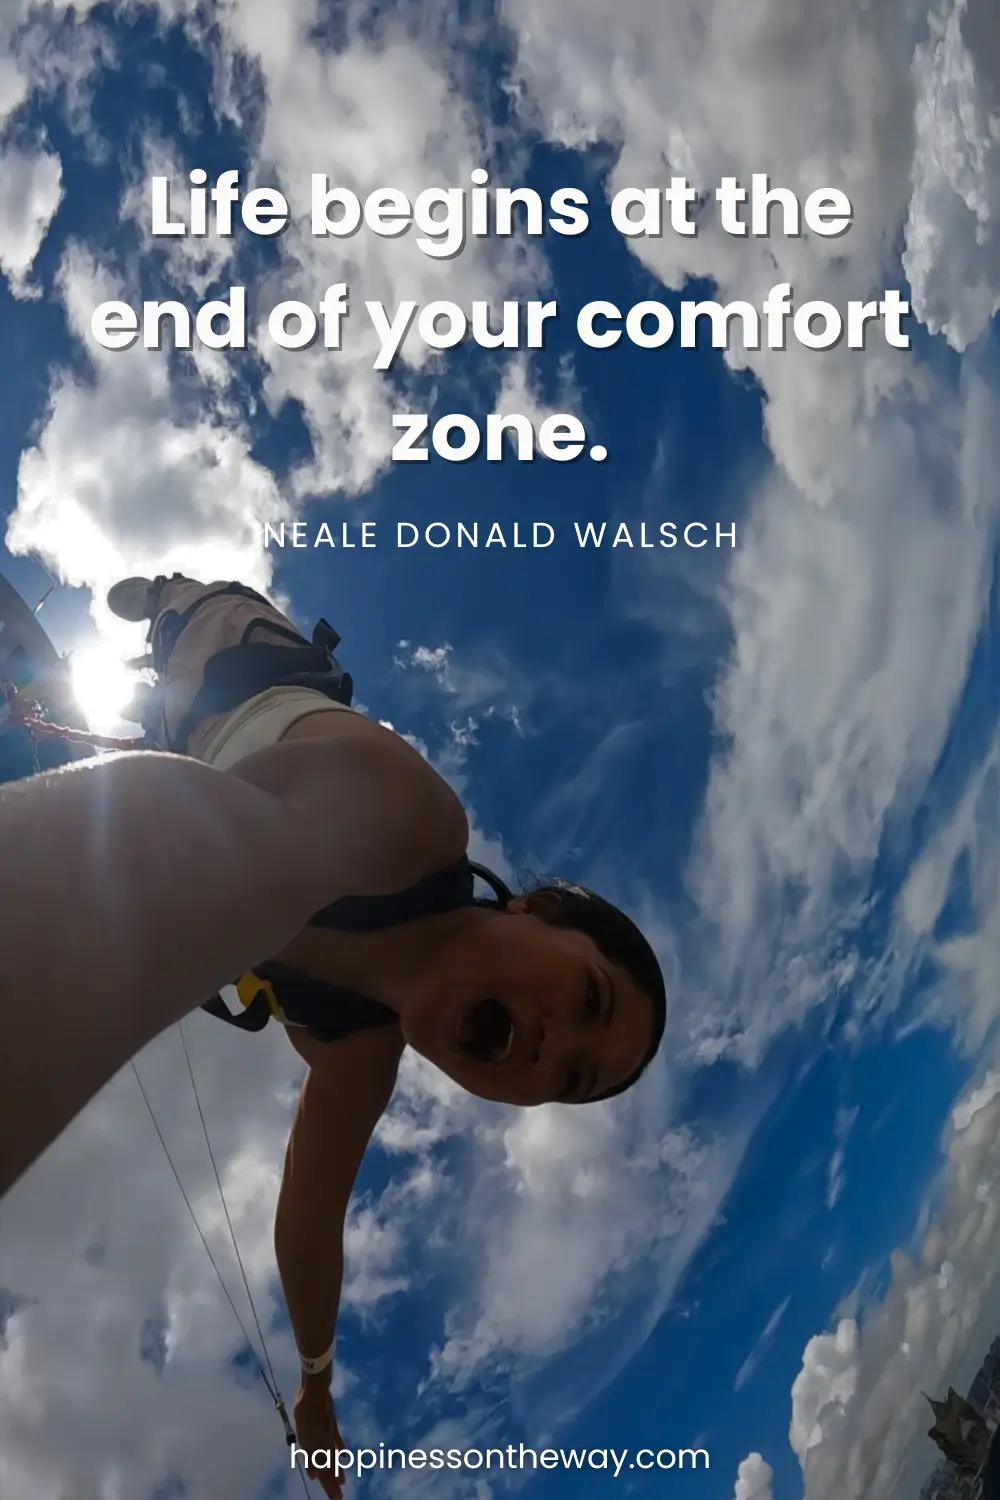 An exhilarating point-of-view shot of me bungee jumping in action, diving into the sky with clouds surrounding, embodying the slow travel quote 'Life begins at the end of your comfort zone' by Neale Donald Walsch.